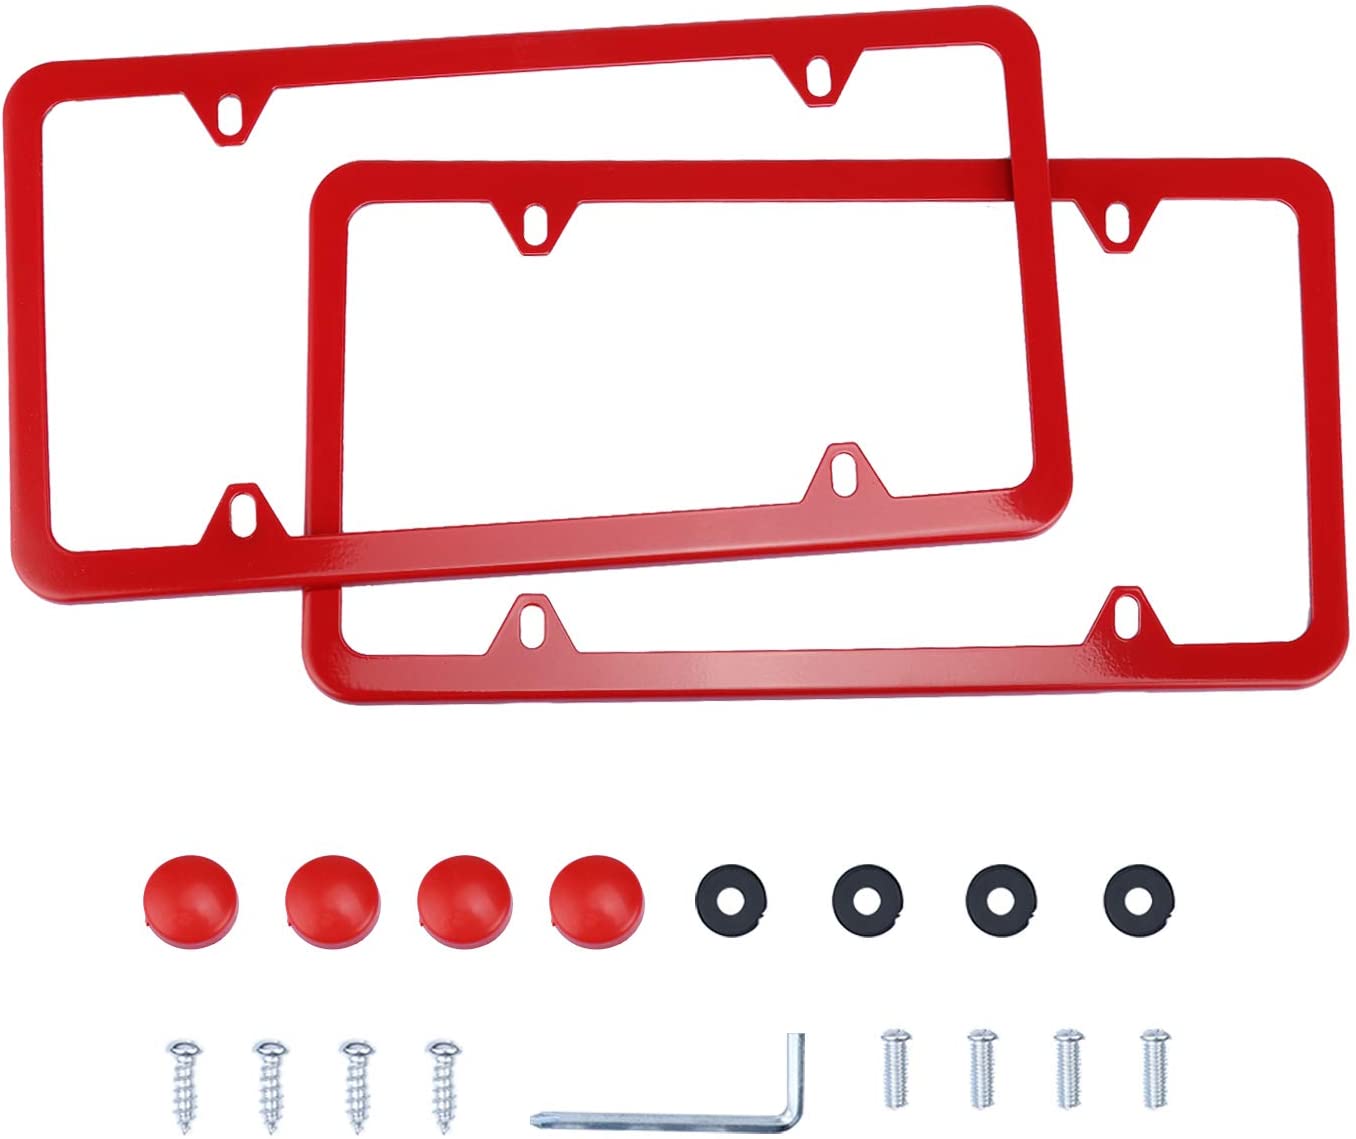 4 Holes Stainless Steel License Plate Frames, 2 PCS Car Licence Plate Covers, Automotive Exterior Accessories Slim Design with Bolts Washer Caps for US Vehicles, Red